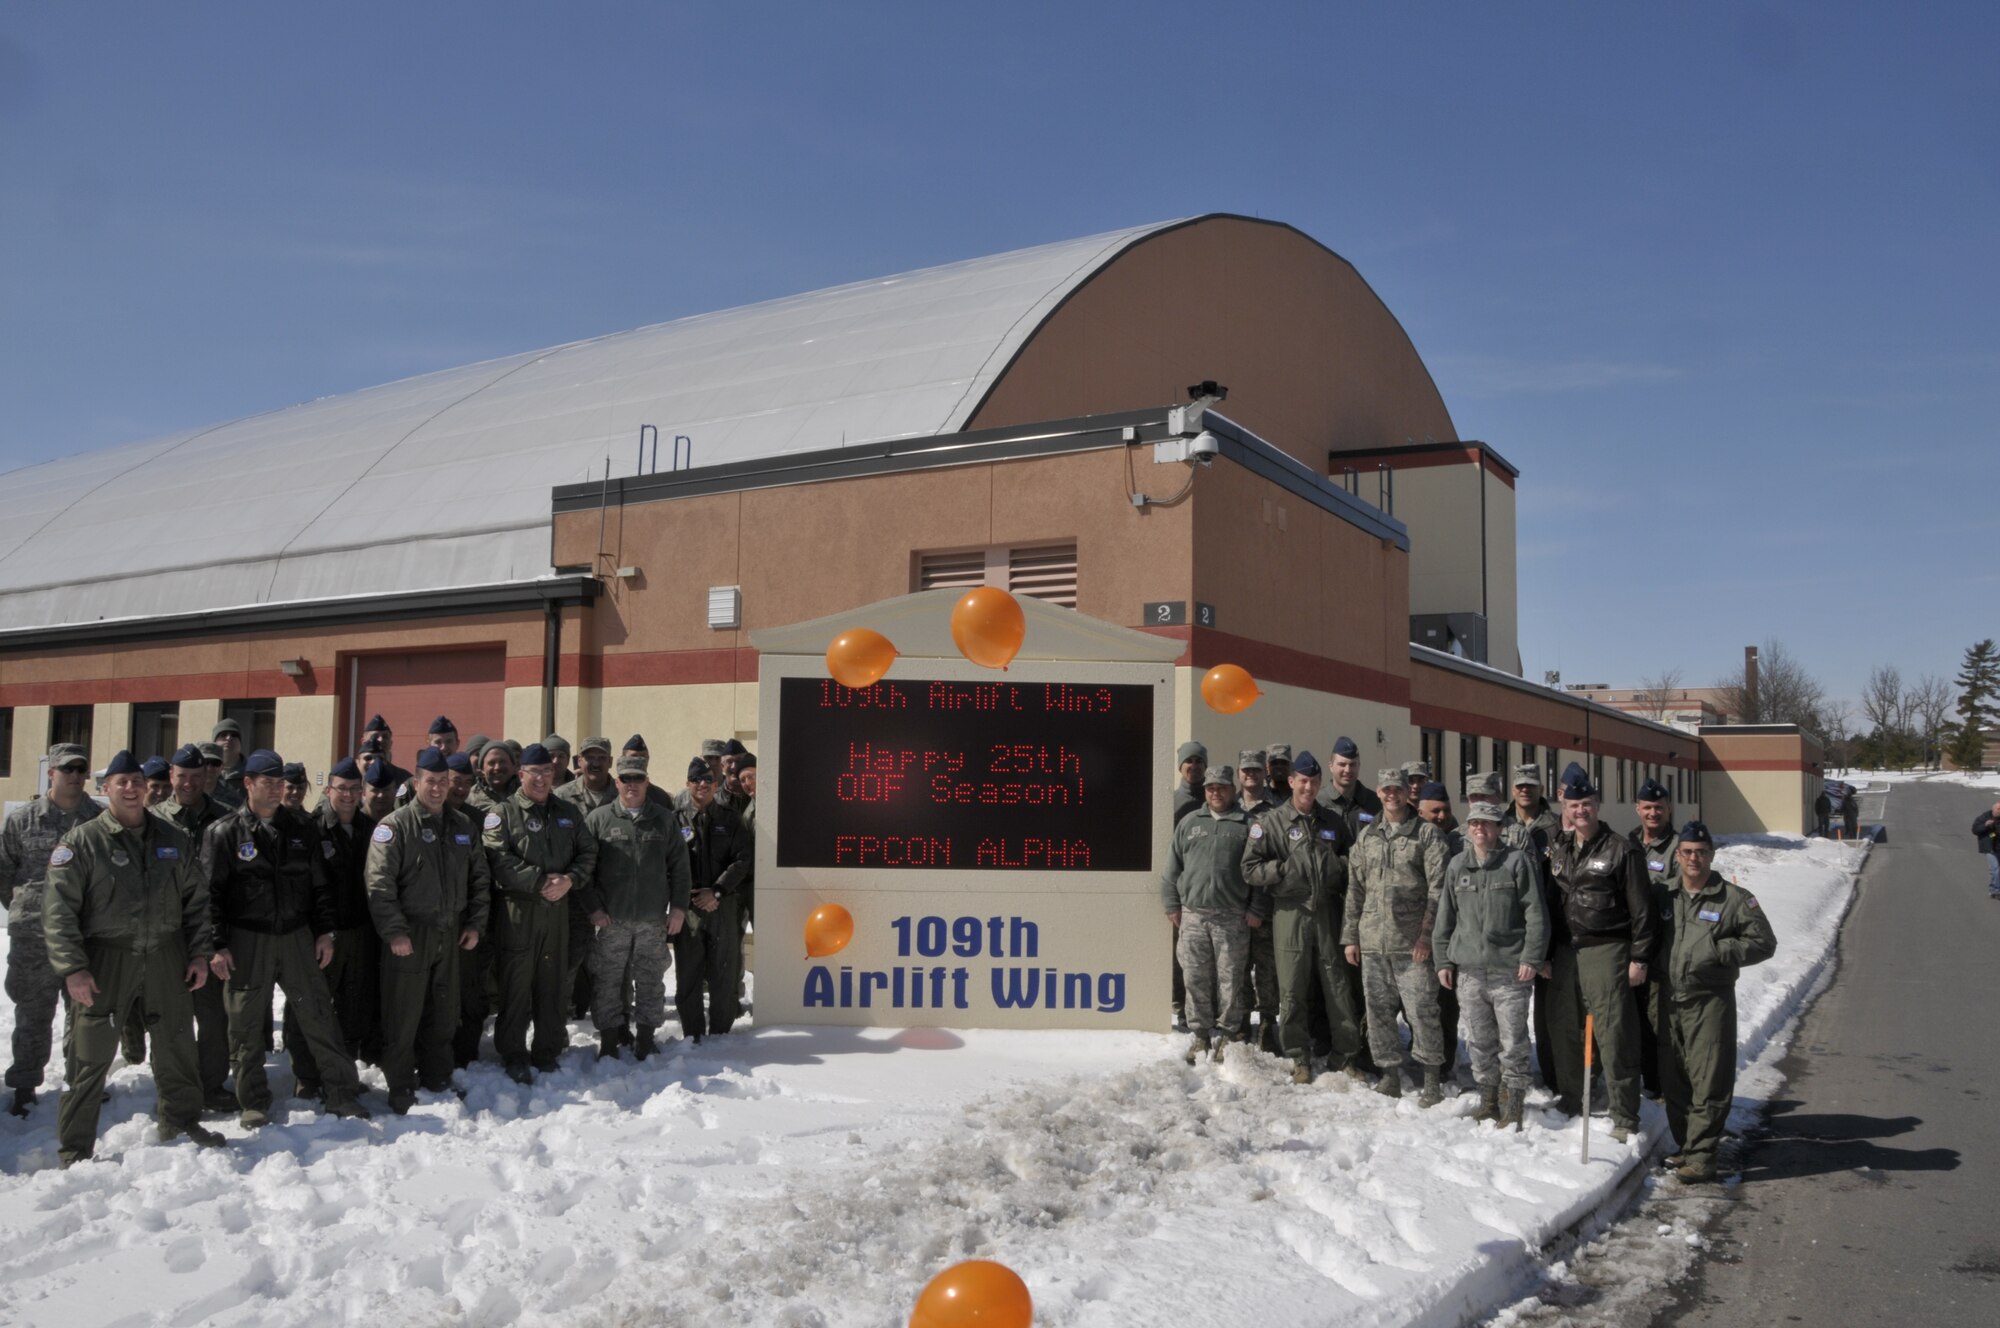 109th Airlift Wing members pose for a photo at the unit's sign in celebration of the unit's 25th year flying missions to Antarctica in support of Operation DEEP FREEZE at Stratton Air National Guard Base on March 21st, 2013. (USAF Photo by MSgt Willie Gizara/Released).